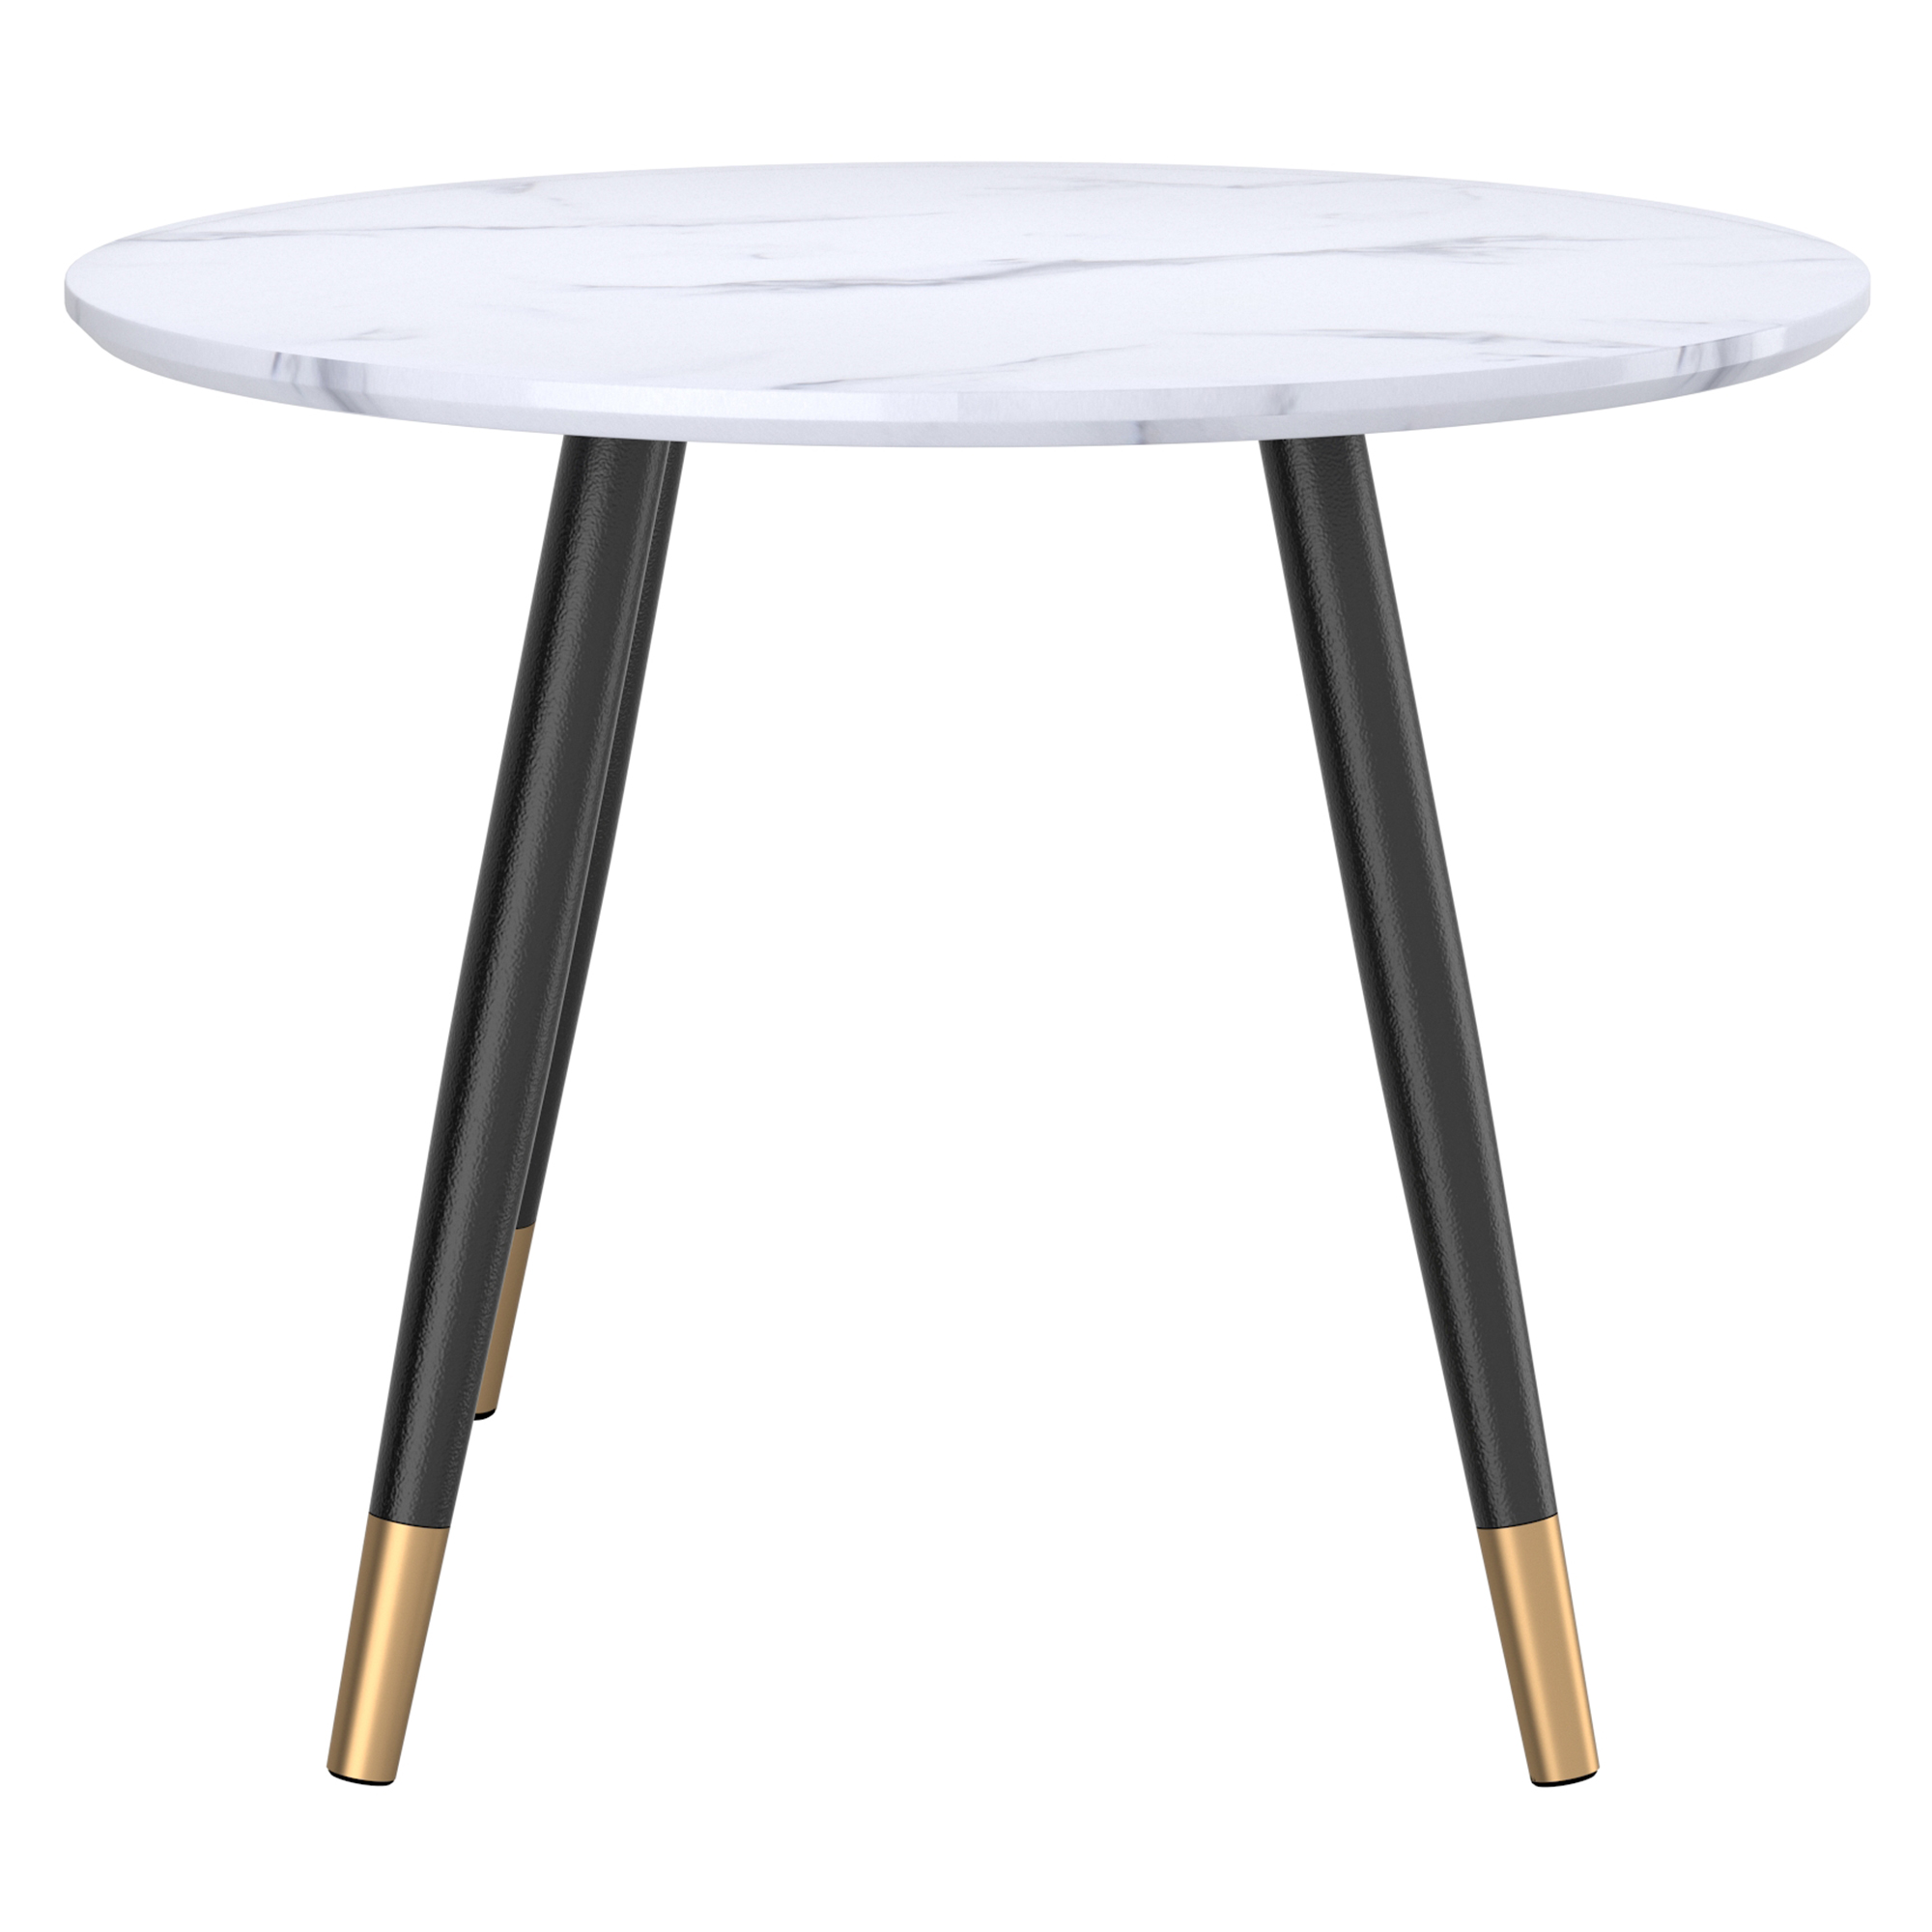 Emery Round Dining Table White